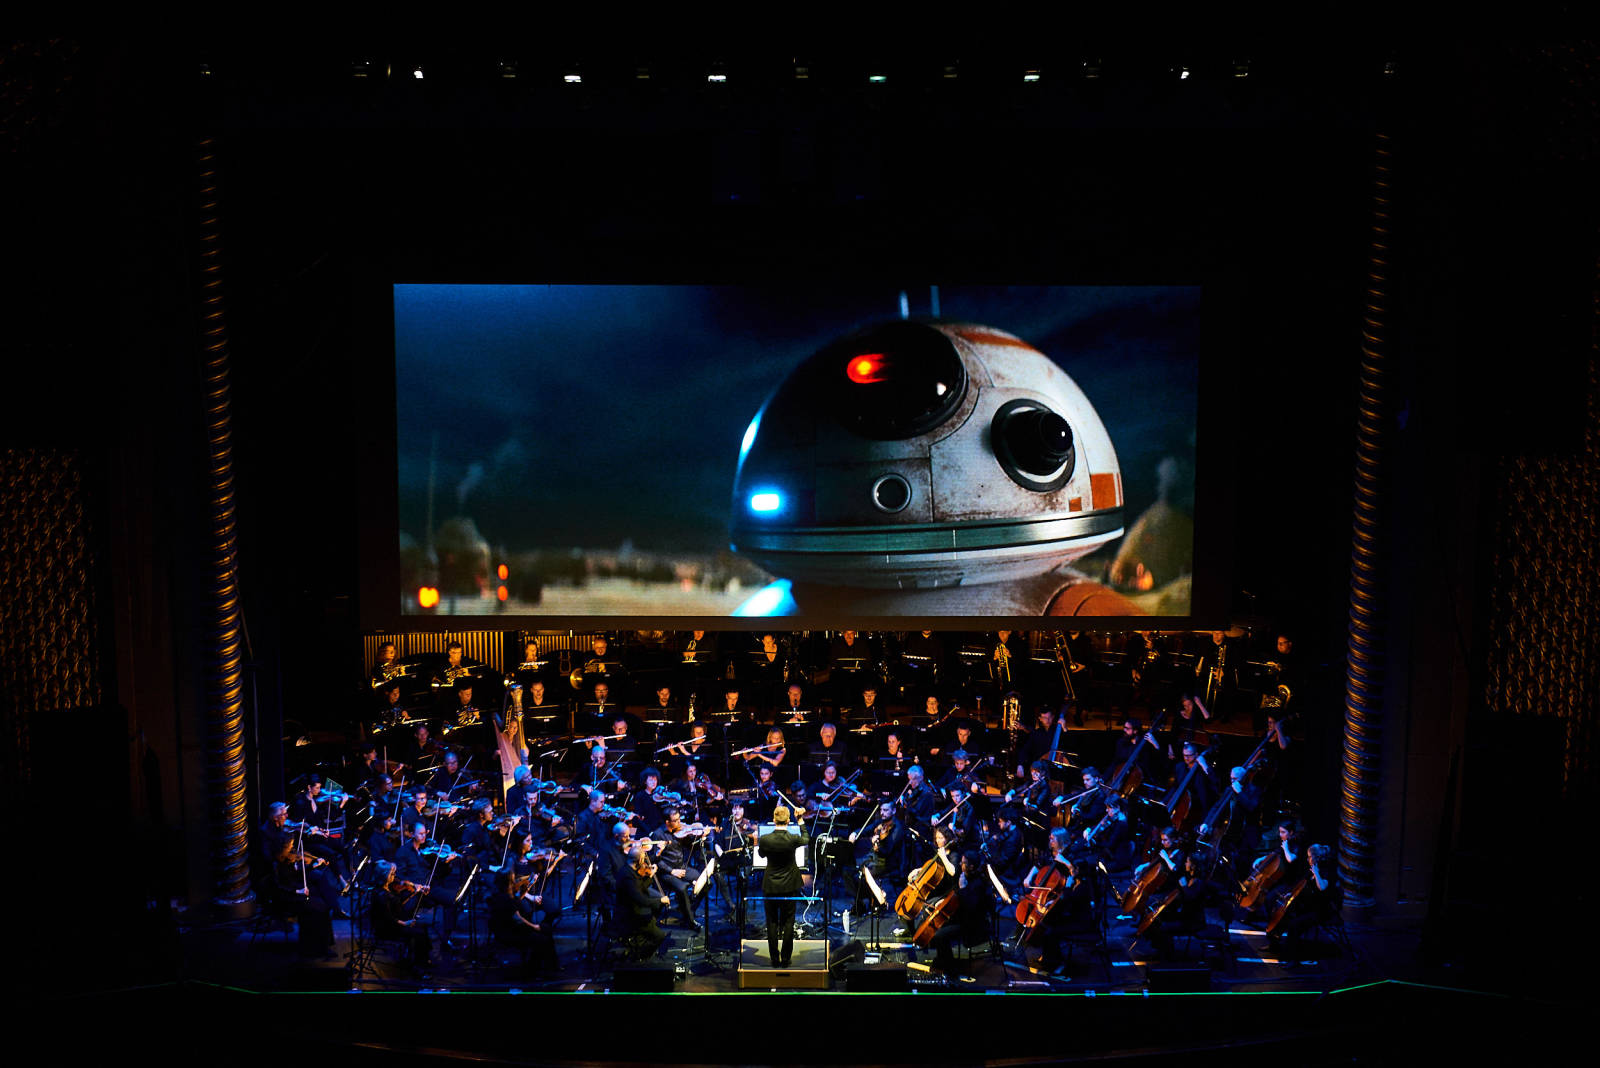 Star Wars Live in Concert - Live-To-Picture Concert Events